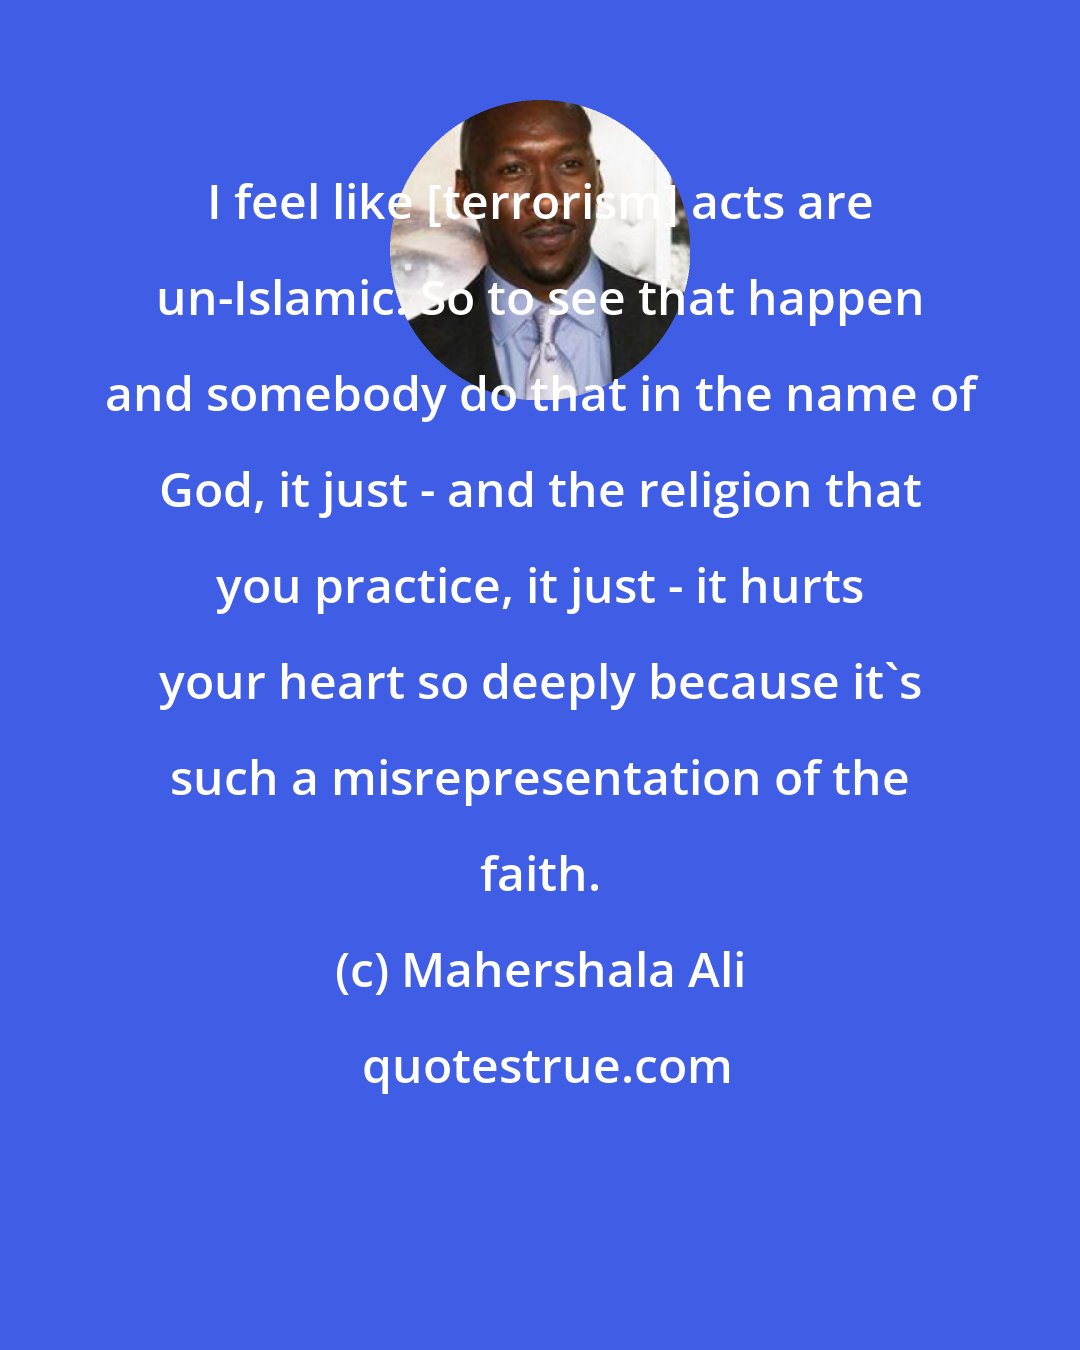 Mahershala Ali: I feel like [terrorism] acts are un-Islamic. So to see that happen and somebody do that in the name of God, it just - and the religion that you practice, it just - it hurts your heart so deeply because it's such a misrepresentation of the faith.